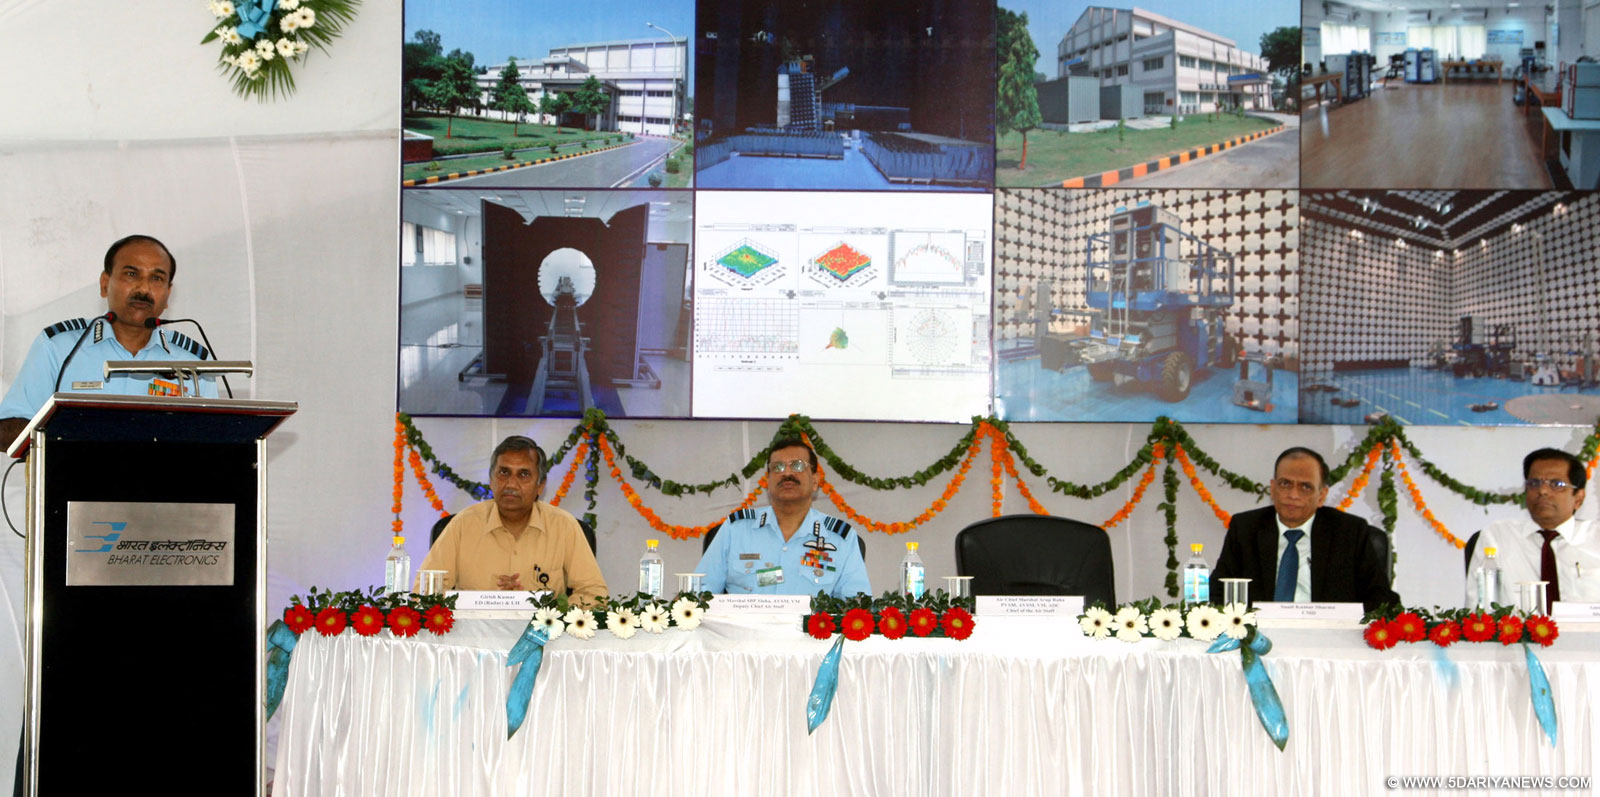 The Chief of the Air Staff, Air Chief Marshal Arup Raha addressing at the inauguration of the EMI-EMC testing facility and a Near Field Antenna Test Range-II, at BEL, Ghaziabad September 21, 2015. The CMD of BEL, Mr. S.K. Sharma and other dignitaries are also seen.